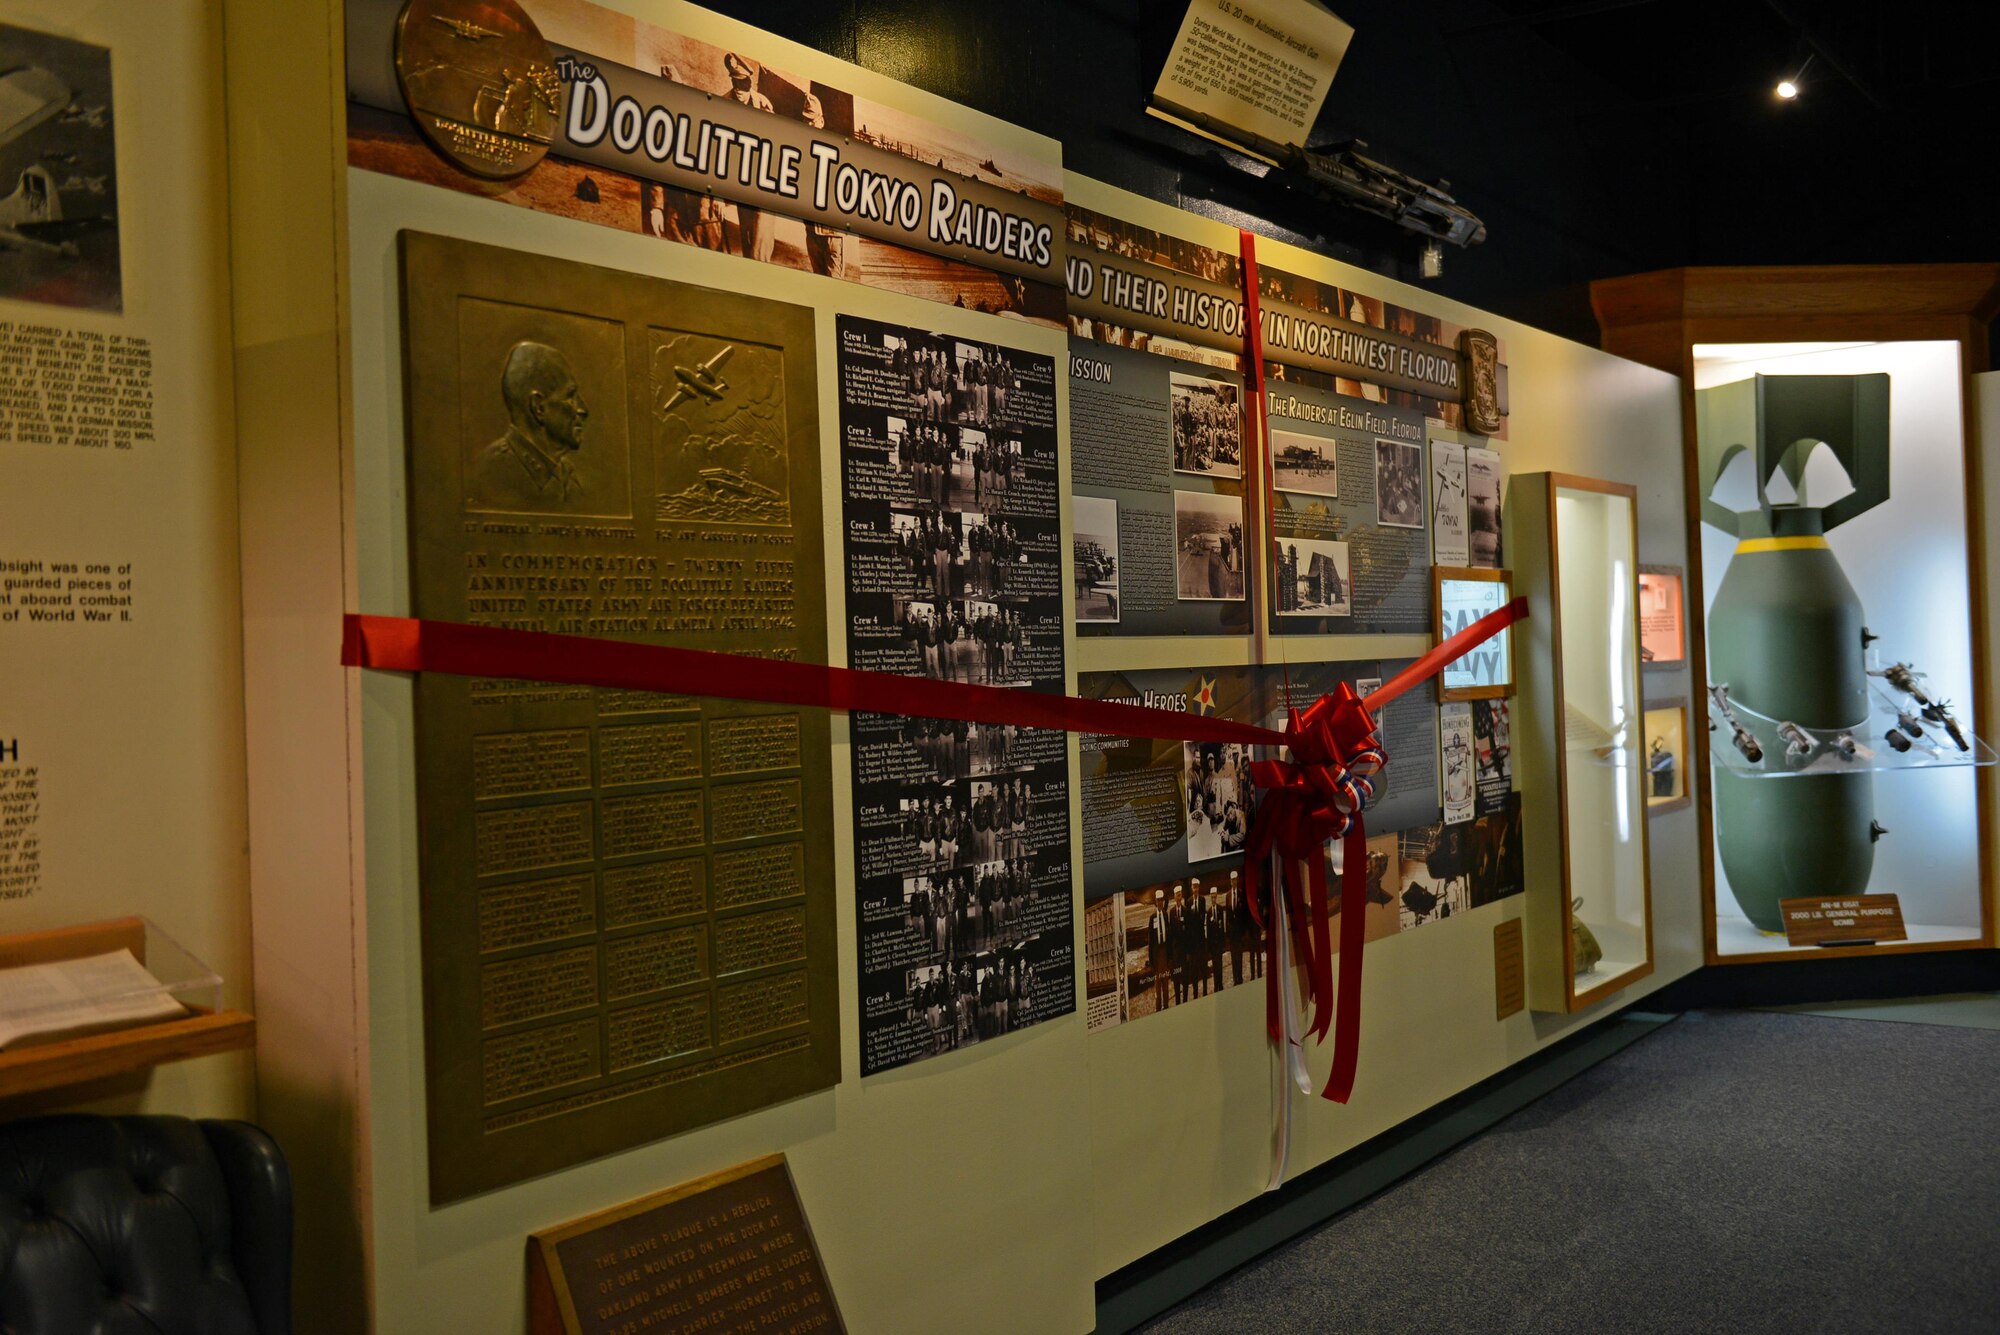 A ribbon surrounds the newly remodeled Doolittle Raider's exhibit at the U.S. Air Force Armament Museum on Eglin Air Force Base, Fla., July 30, 2016. (U.S. Air Force photo/Staff Sgt. Melanie Holochwost)